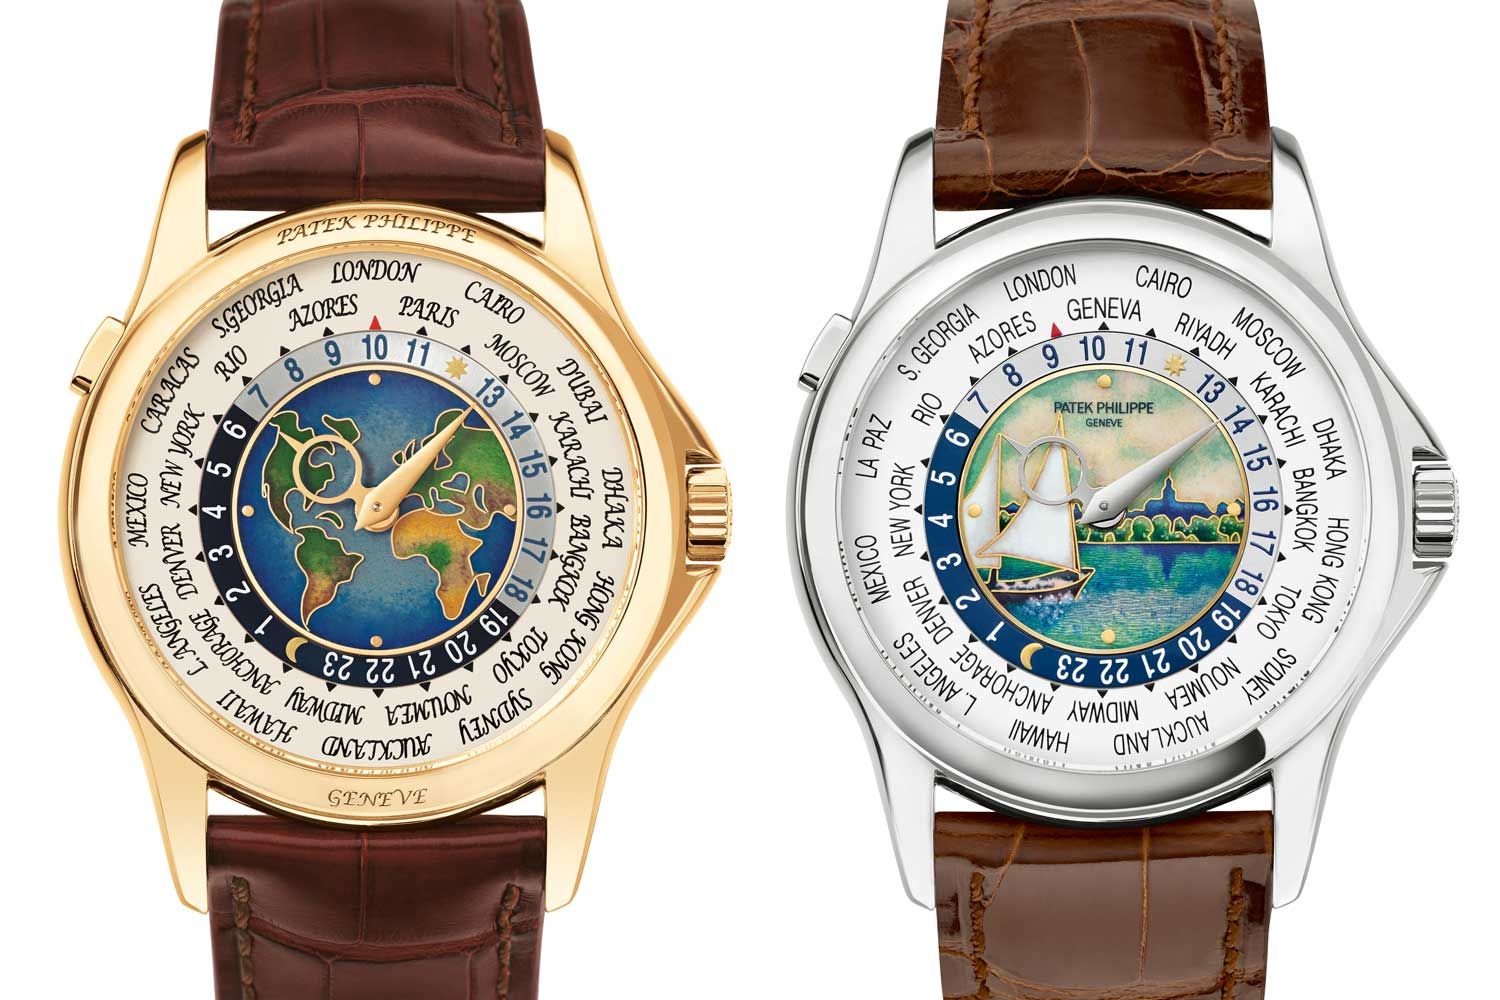 The 5131 was initially introduced in two stunning versions, a yellow gold watch with a map of North and South America, Europe and Africa, and a white gold version with a map of Africa, Europe, Asia and Australia. (Images: Patek Philippe)